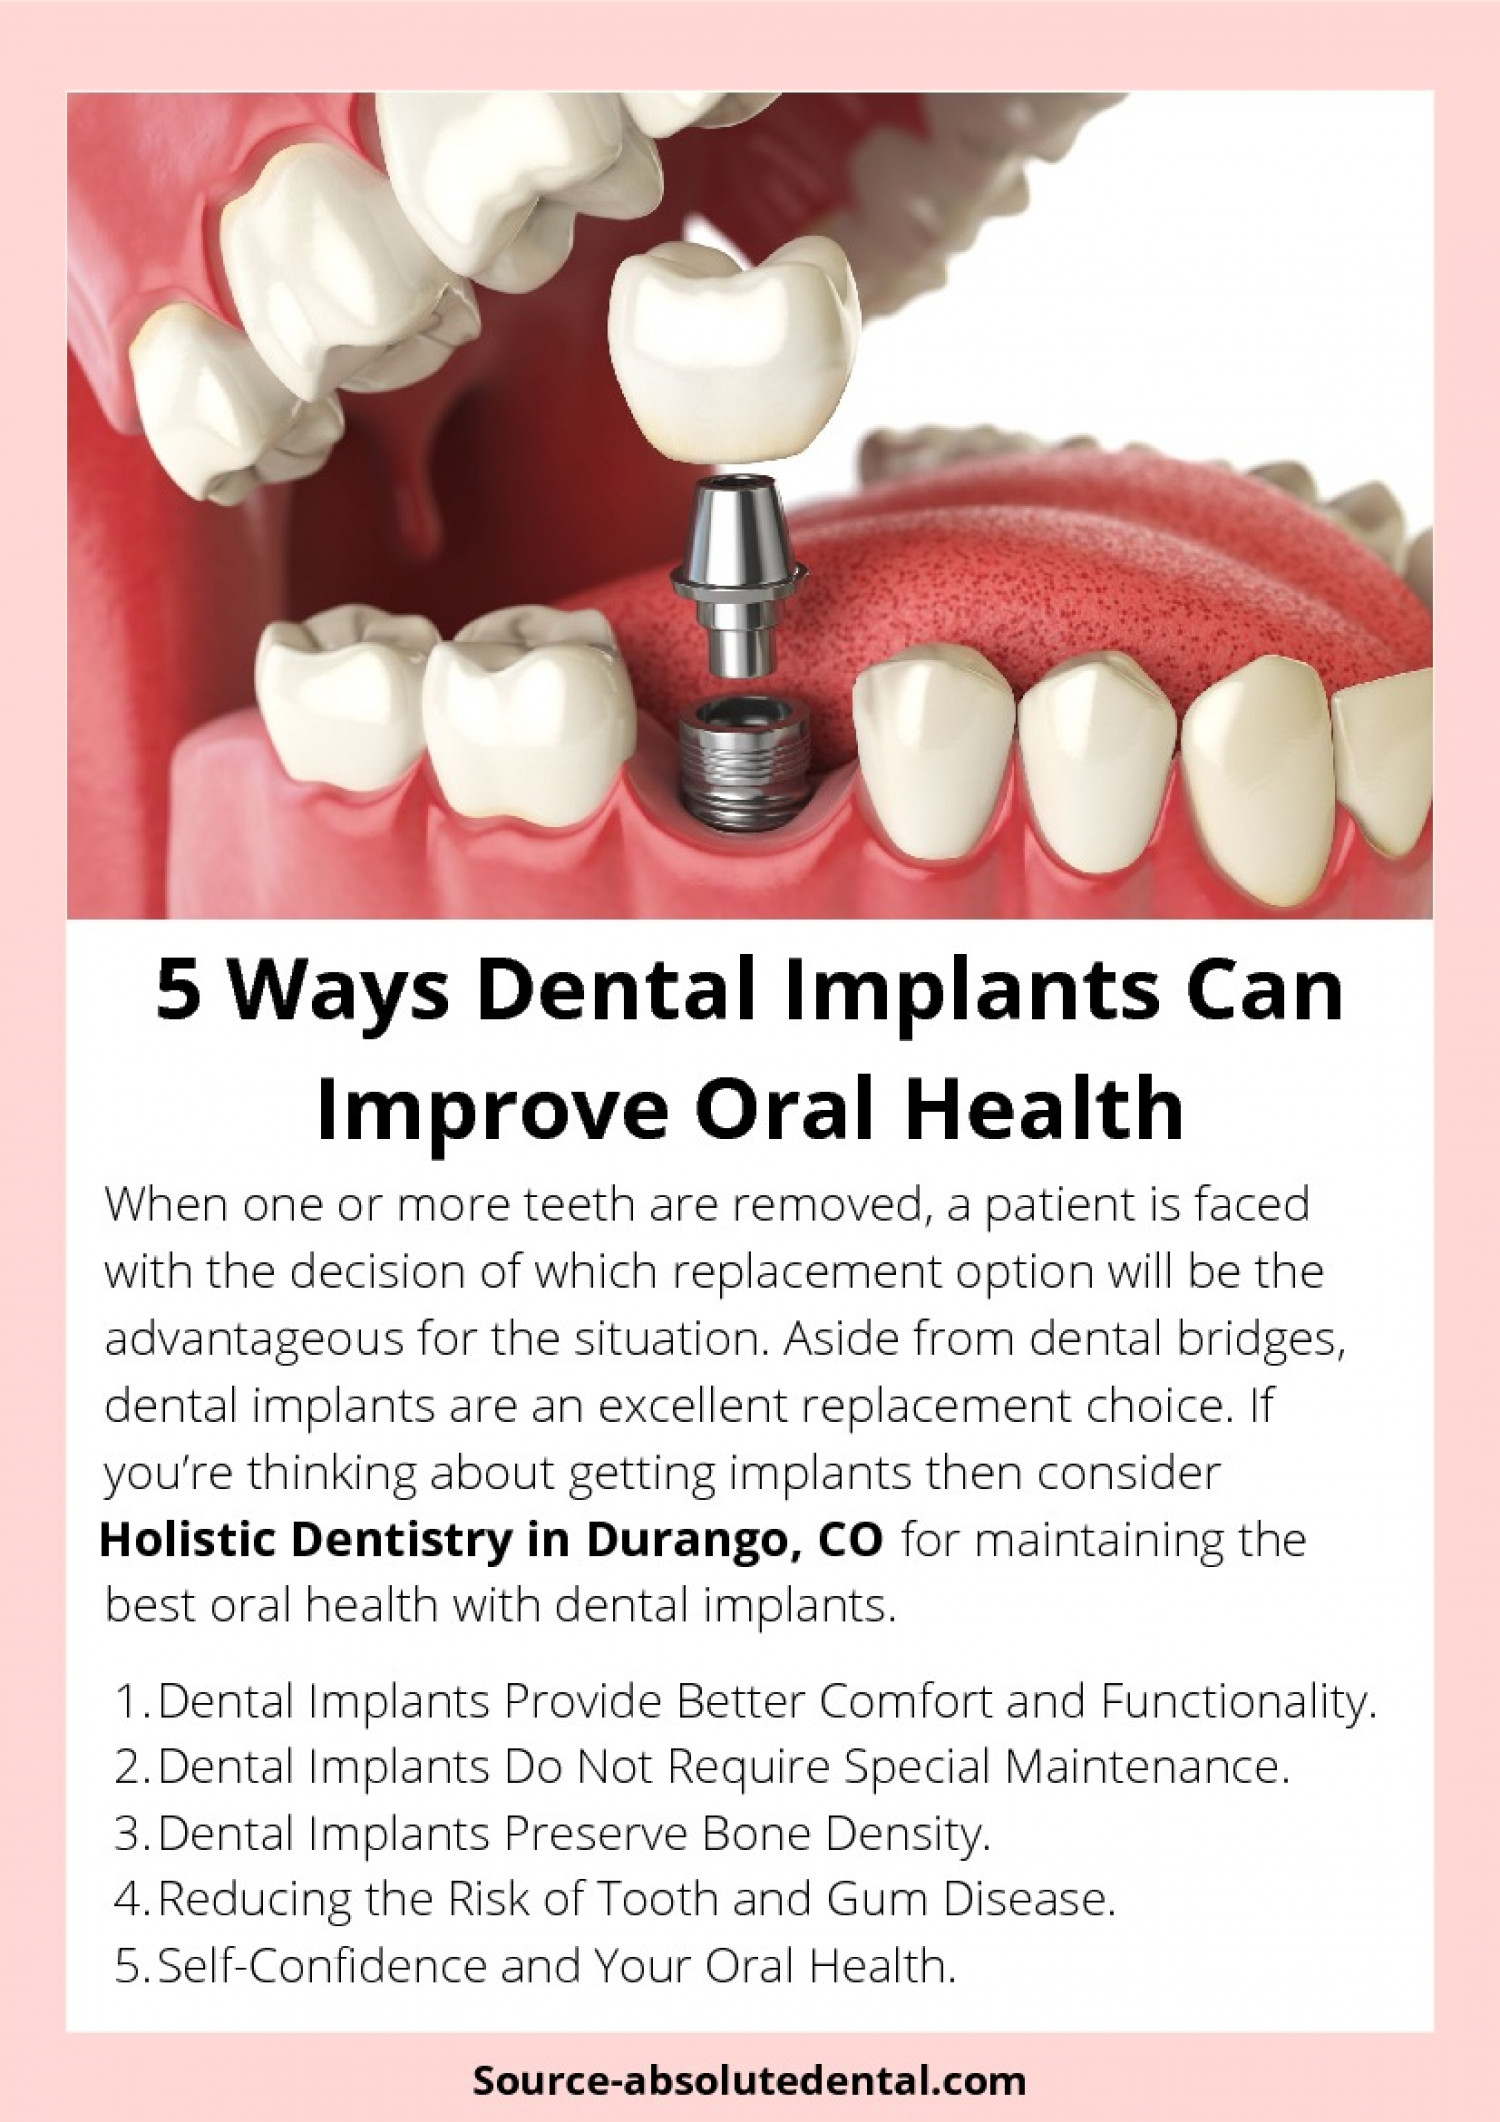 5 Ways Dental Implants Can Improve Oral Health Infographic